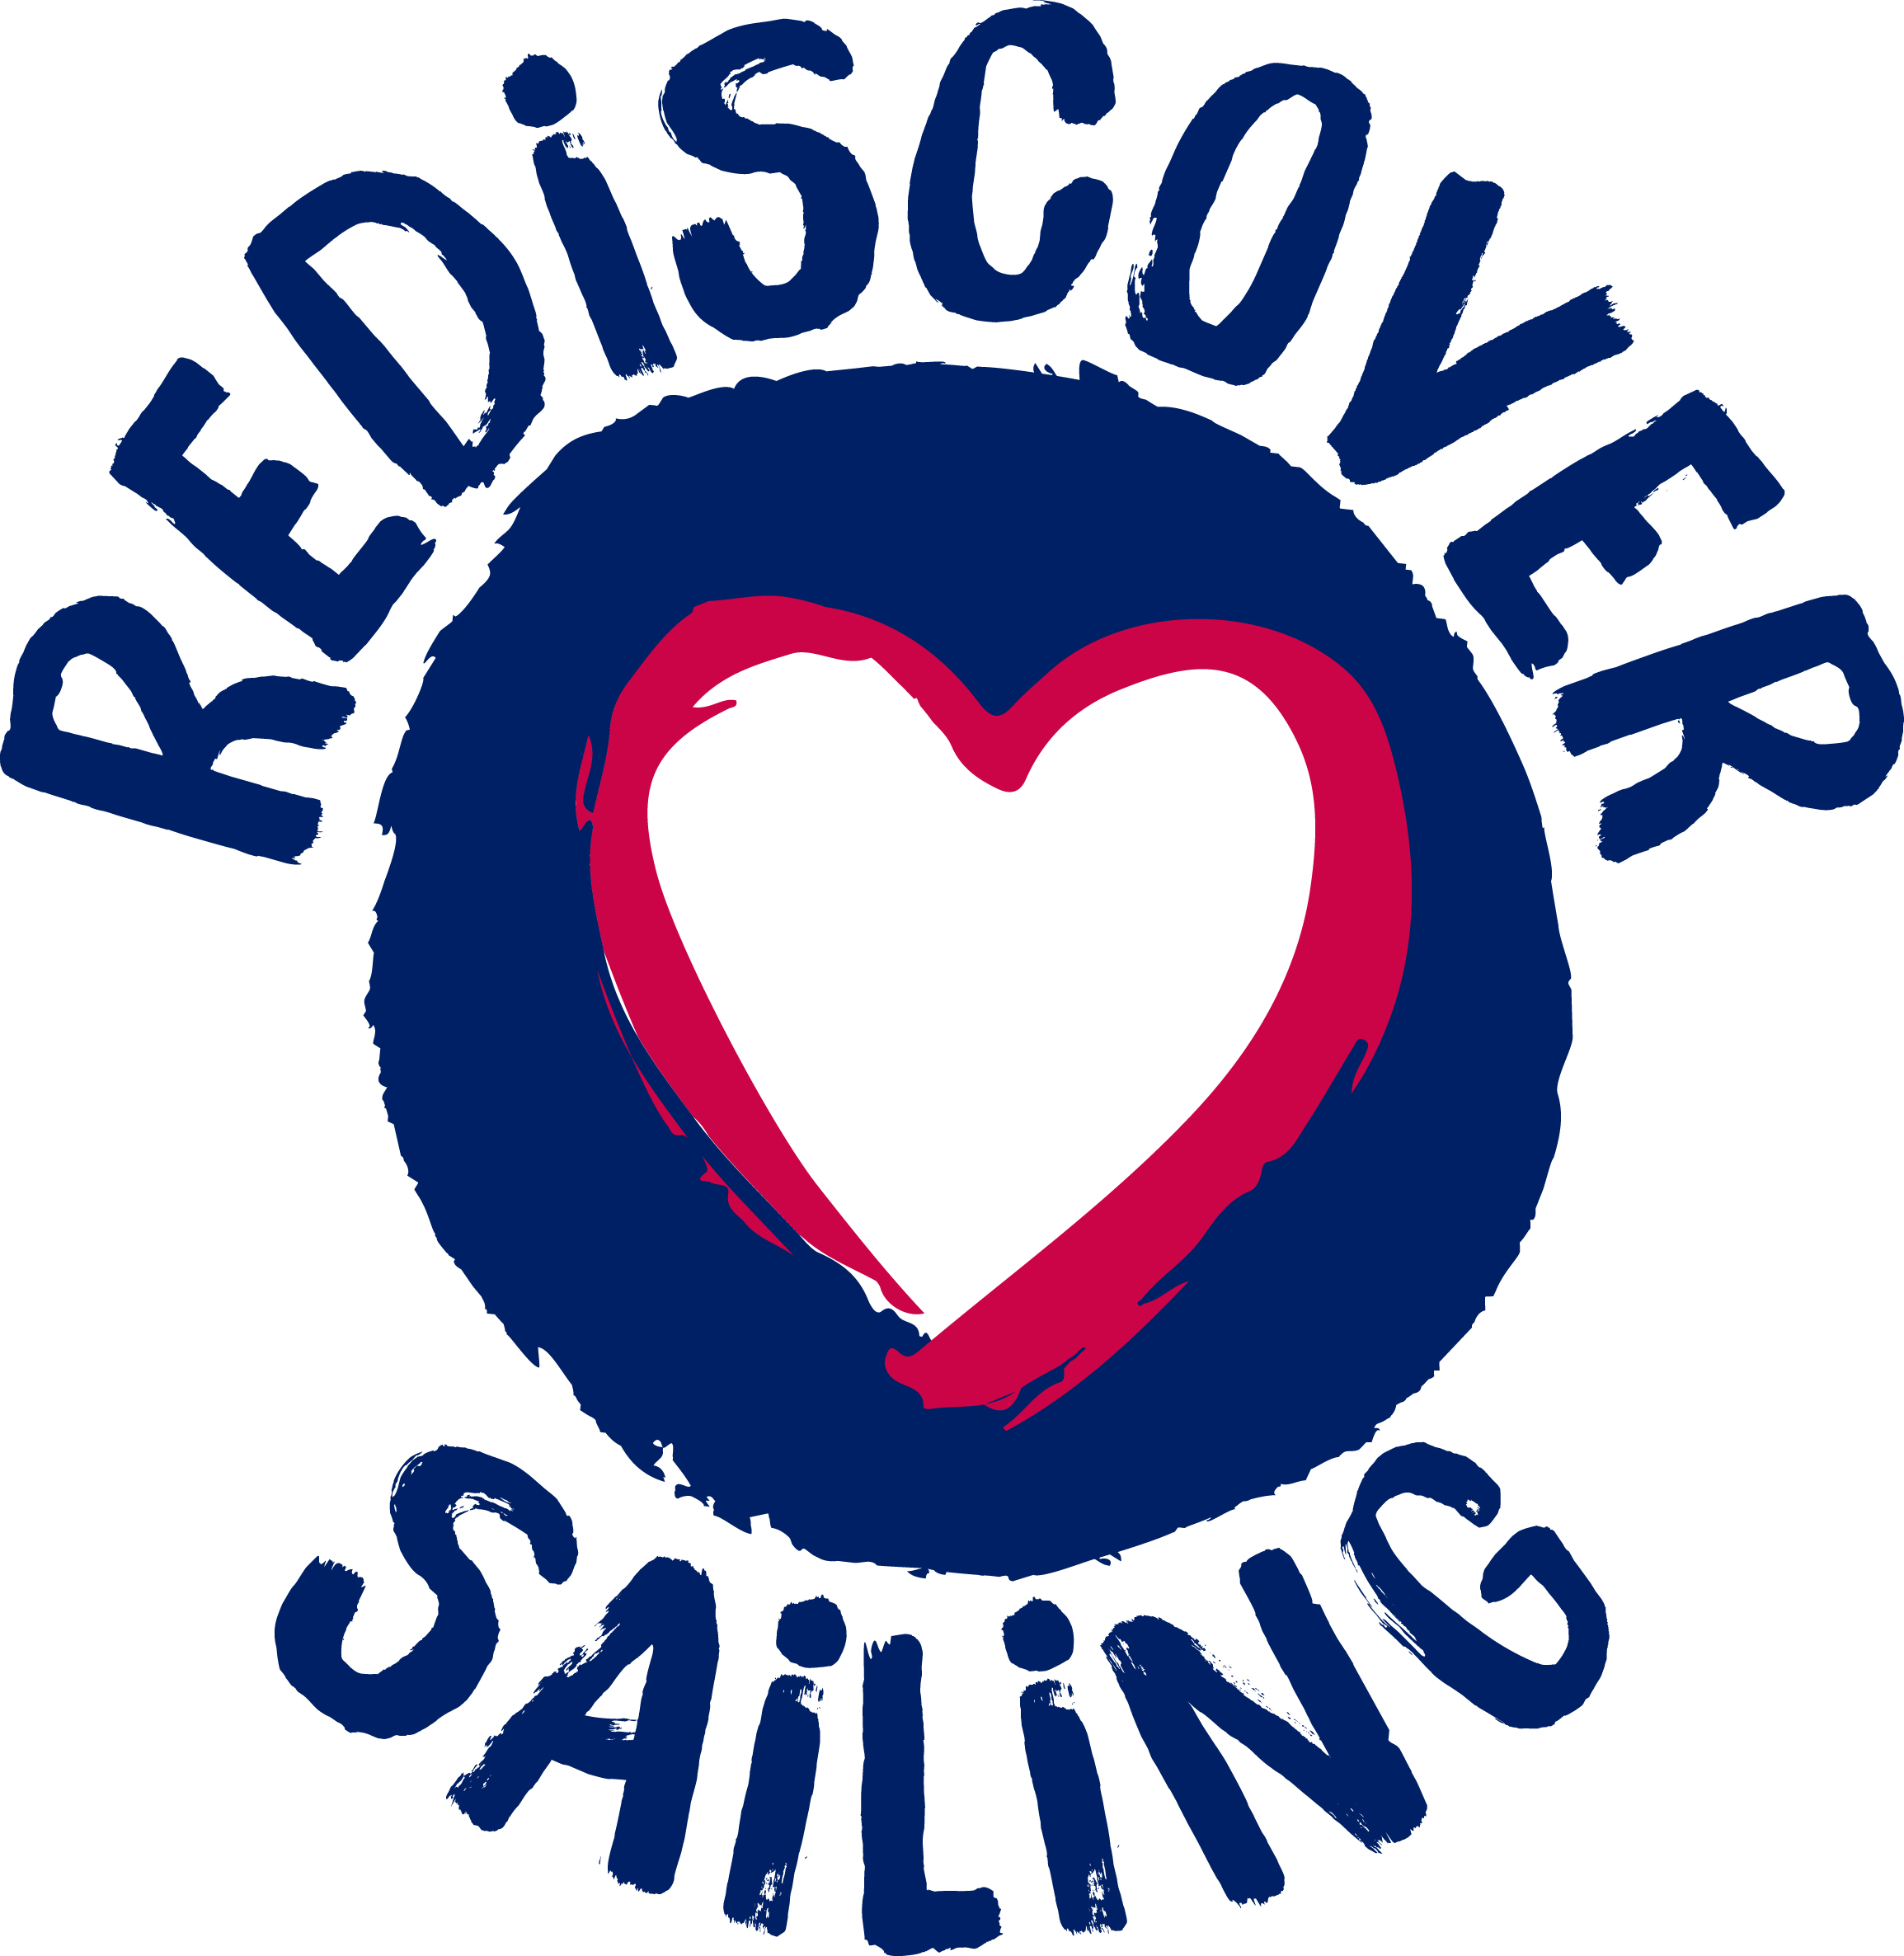 This is the ReDiscover Sailing logo